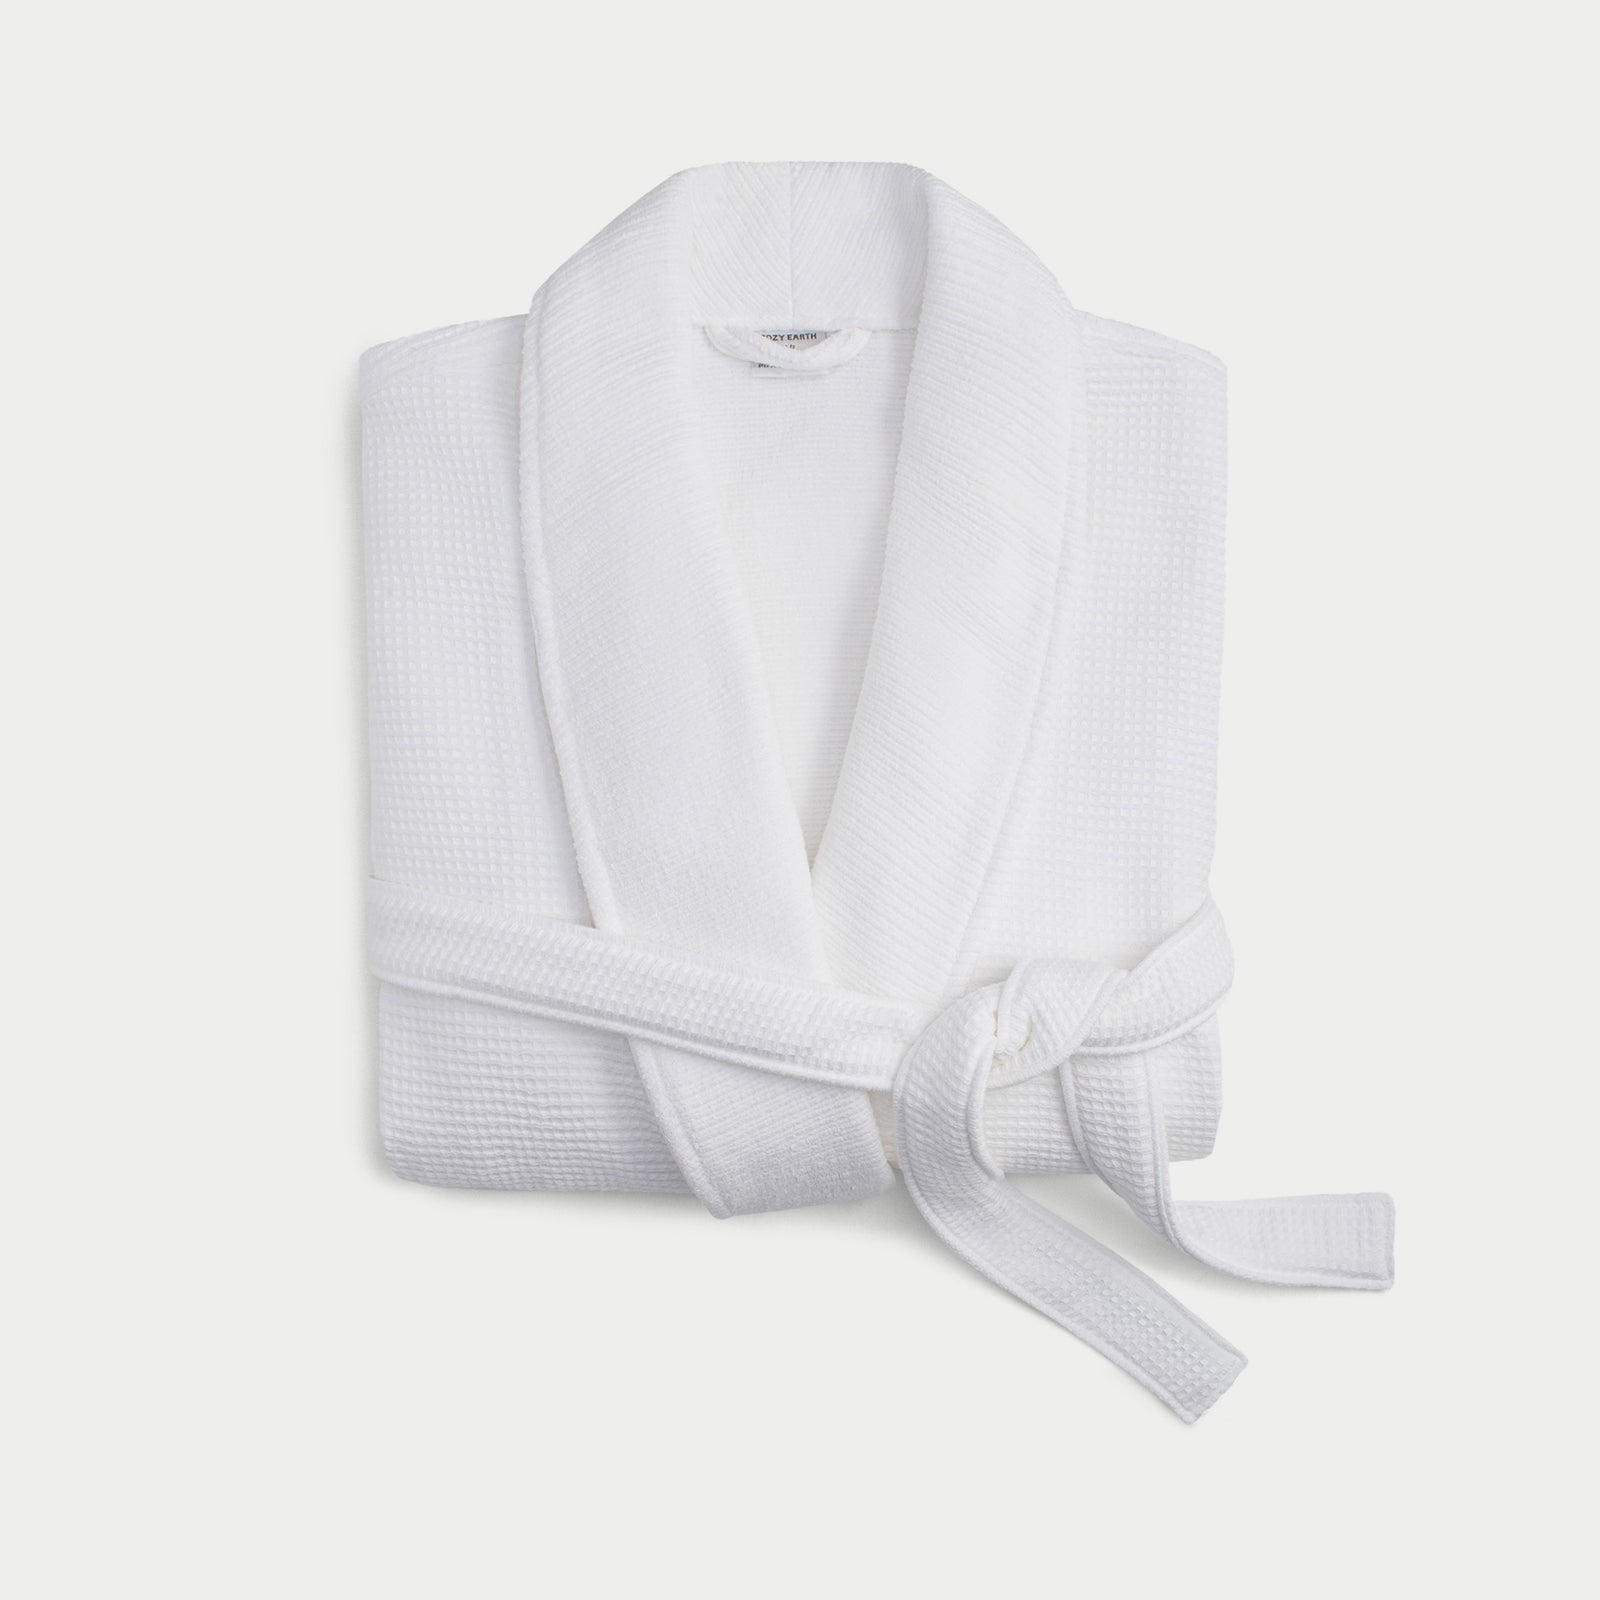 White bamboo waffle knit robe shown neatly folded with a white background. 